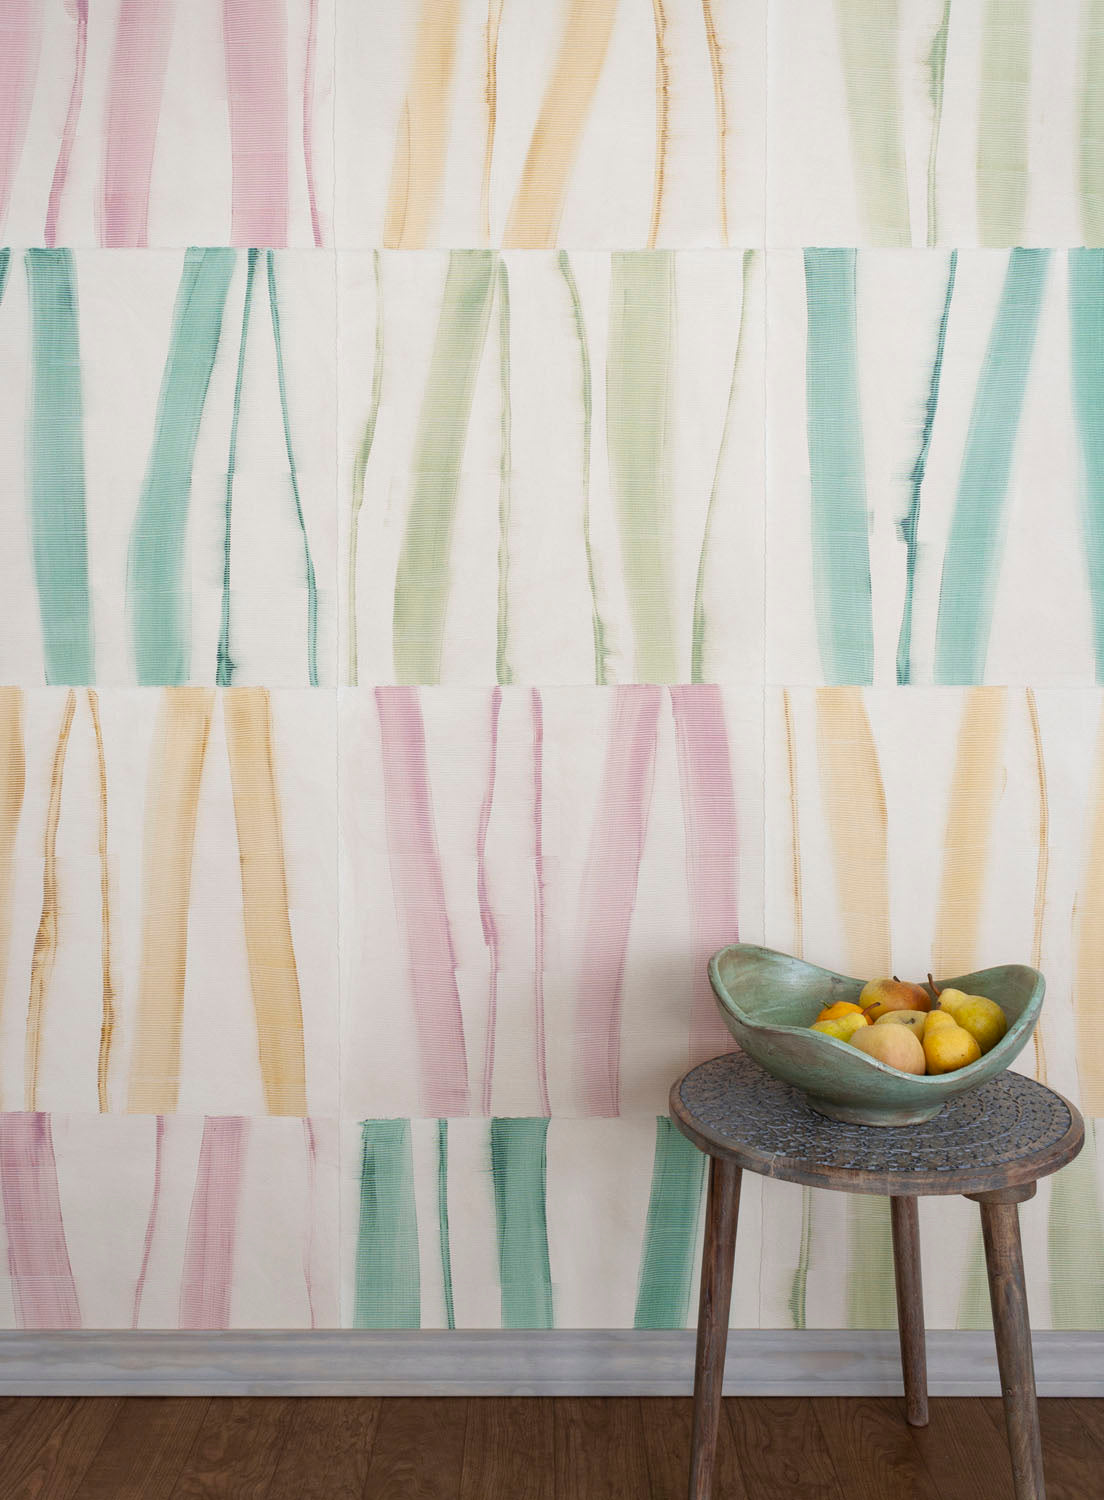 A stool stands in front of a wall covered in an irregular striped wallpaper in shades of teal, pink, green and yellow.